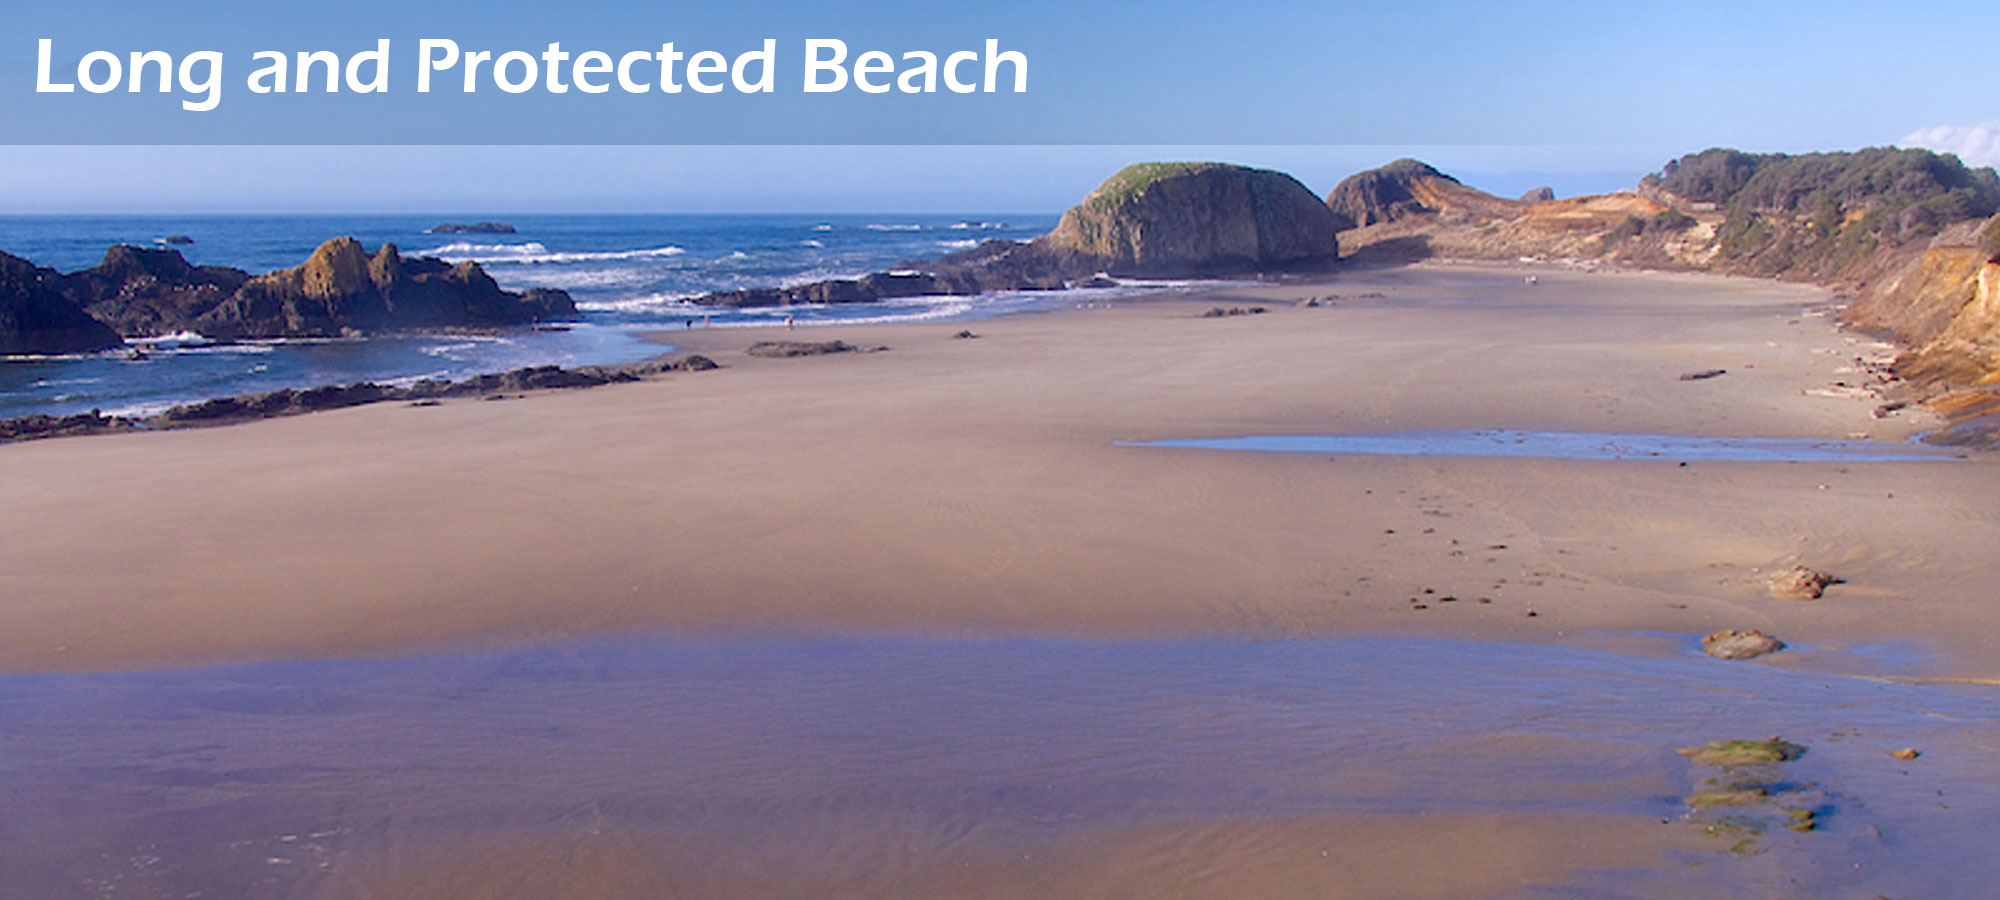 Long and Protected Beach